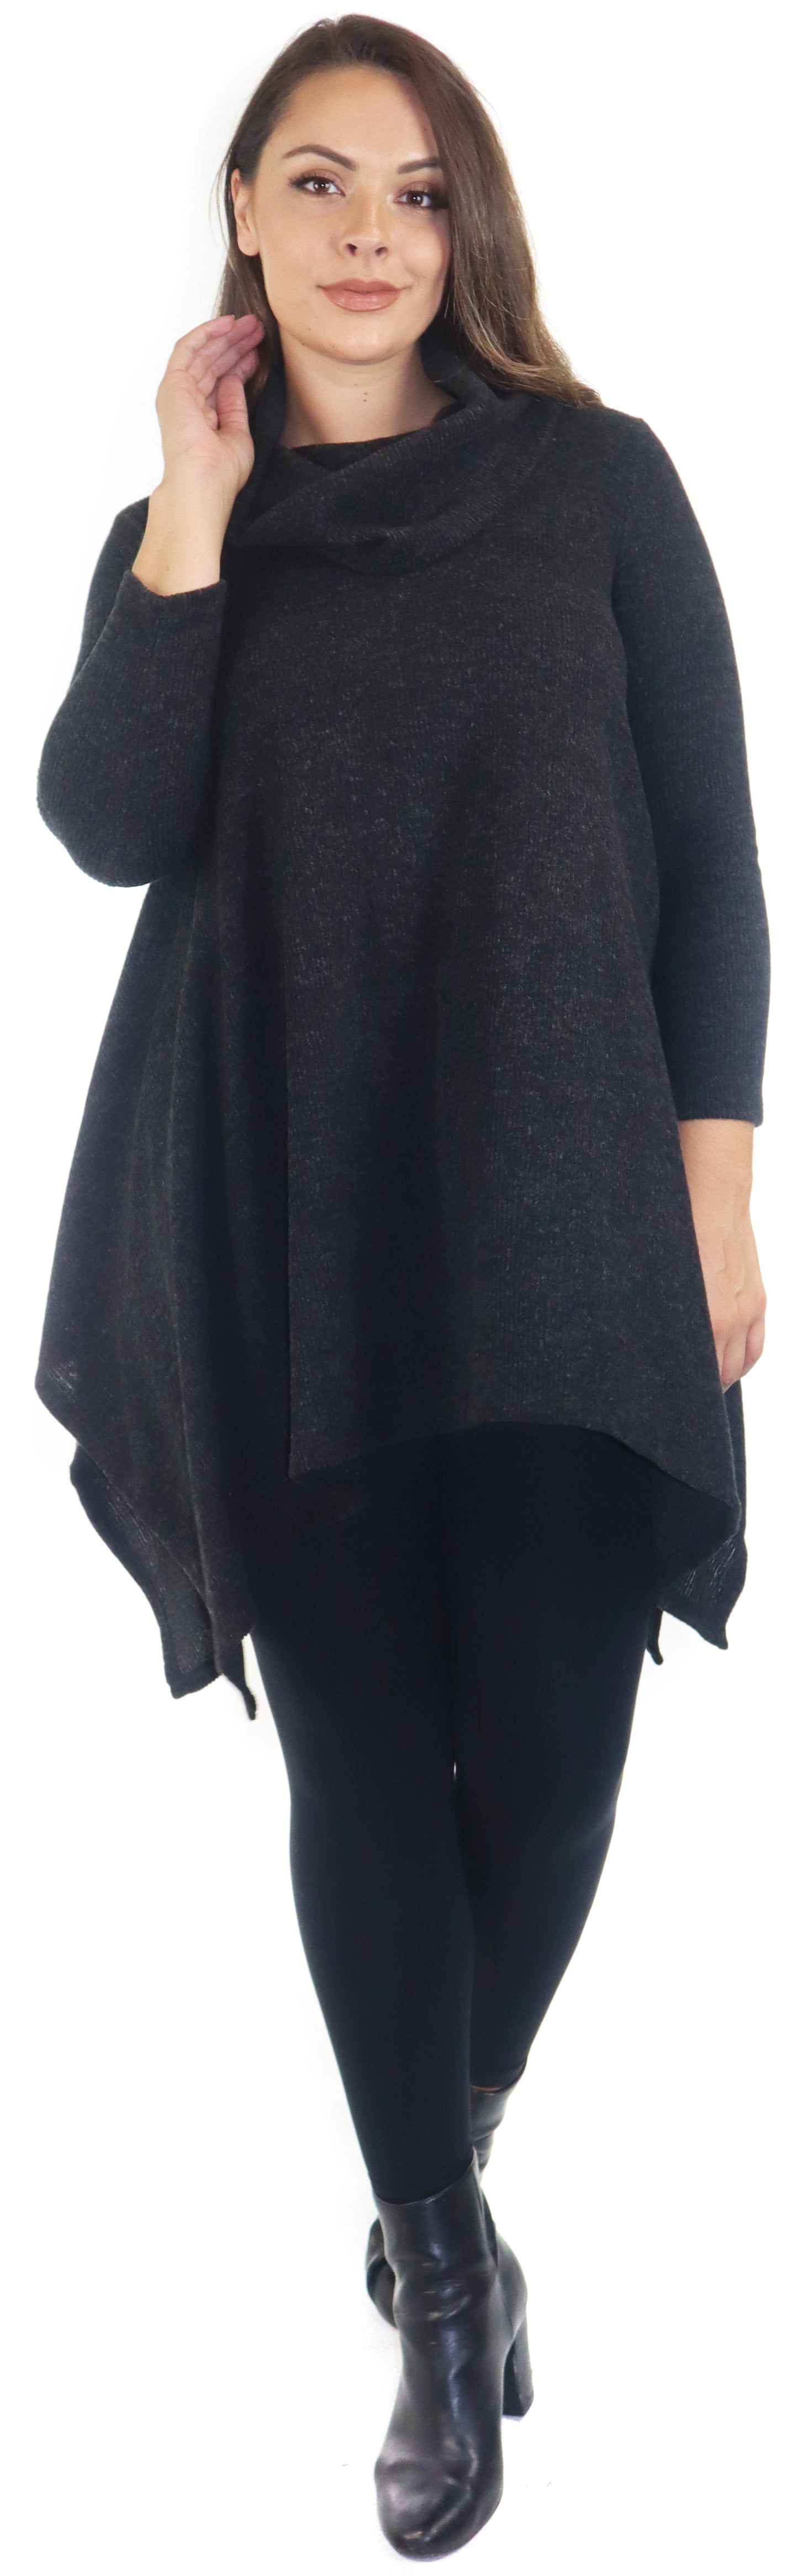 Cowl Neck Cozy Asymmetrical Hem Tunic Outerwear Sweater for Chilly Weather, Flared Hemline, Made in USA, Available in Regular and Plus Sizes